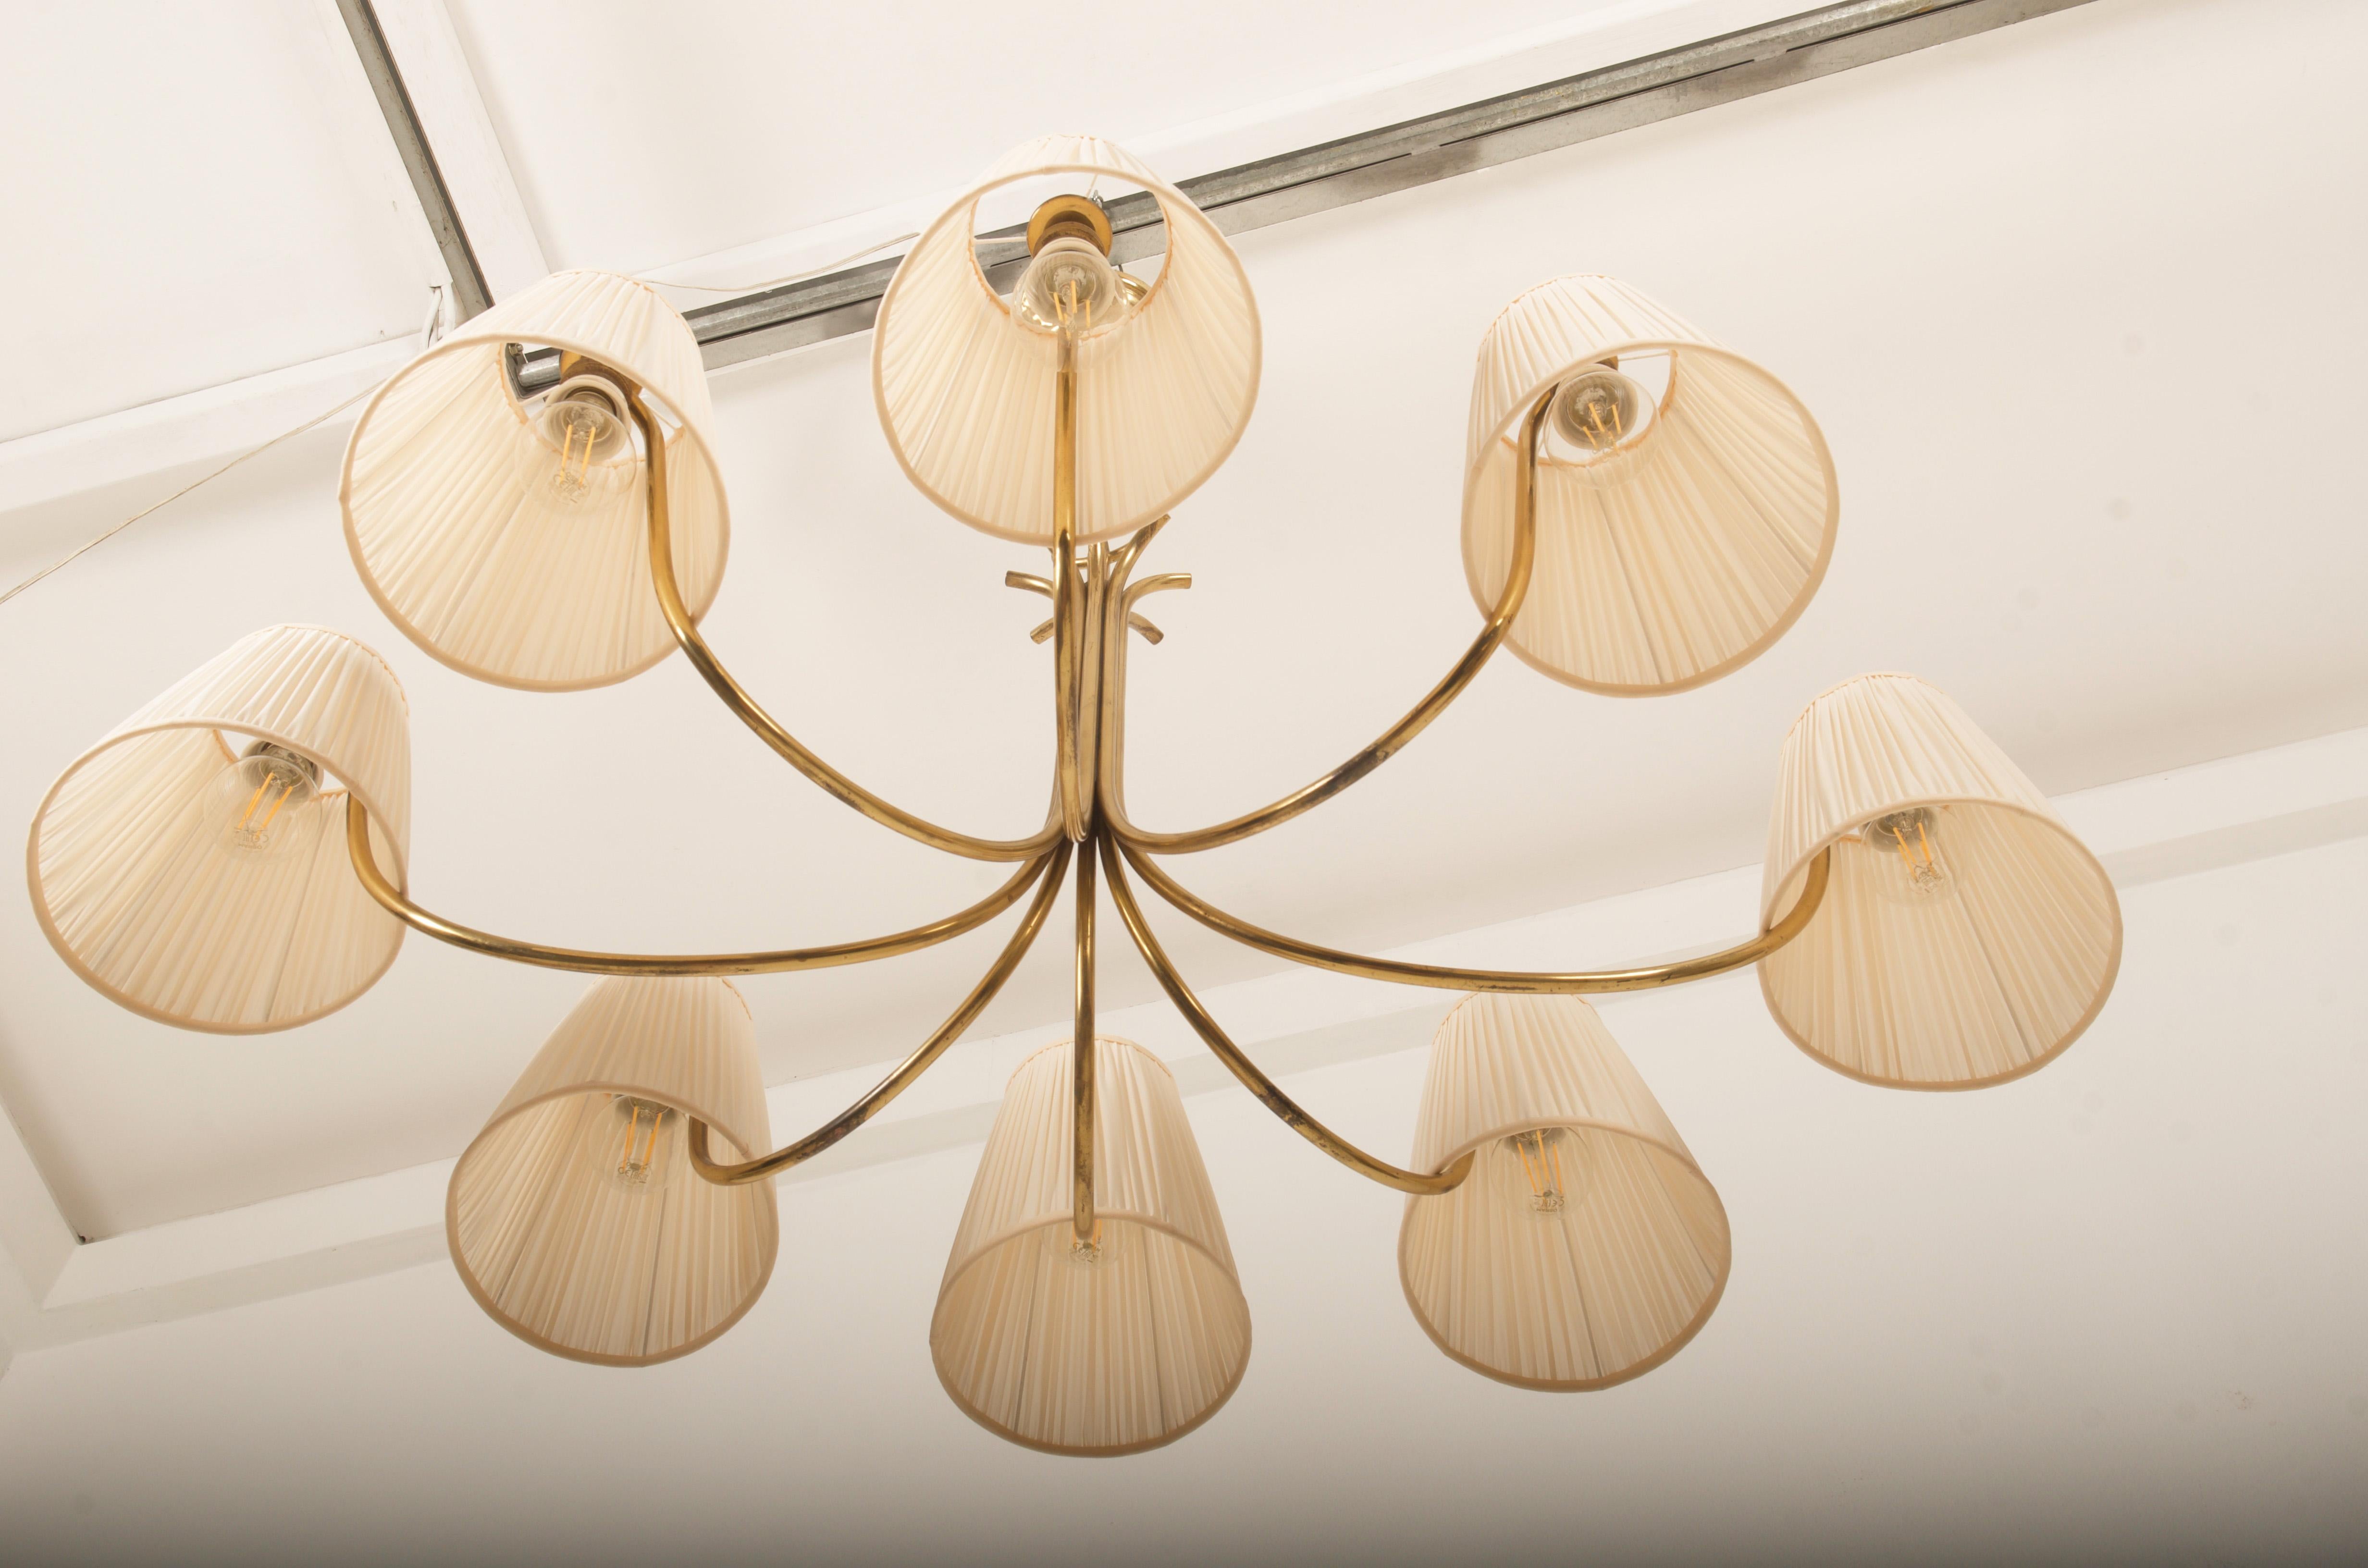 Rare Eight Arms Chandelier by Josef Frank for Kalmar 5